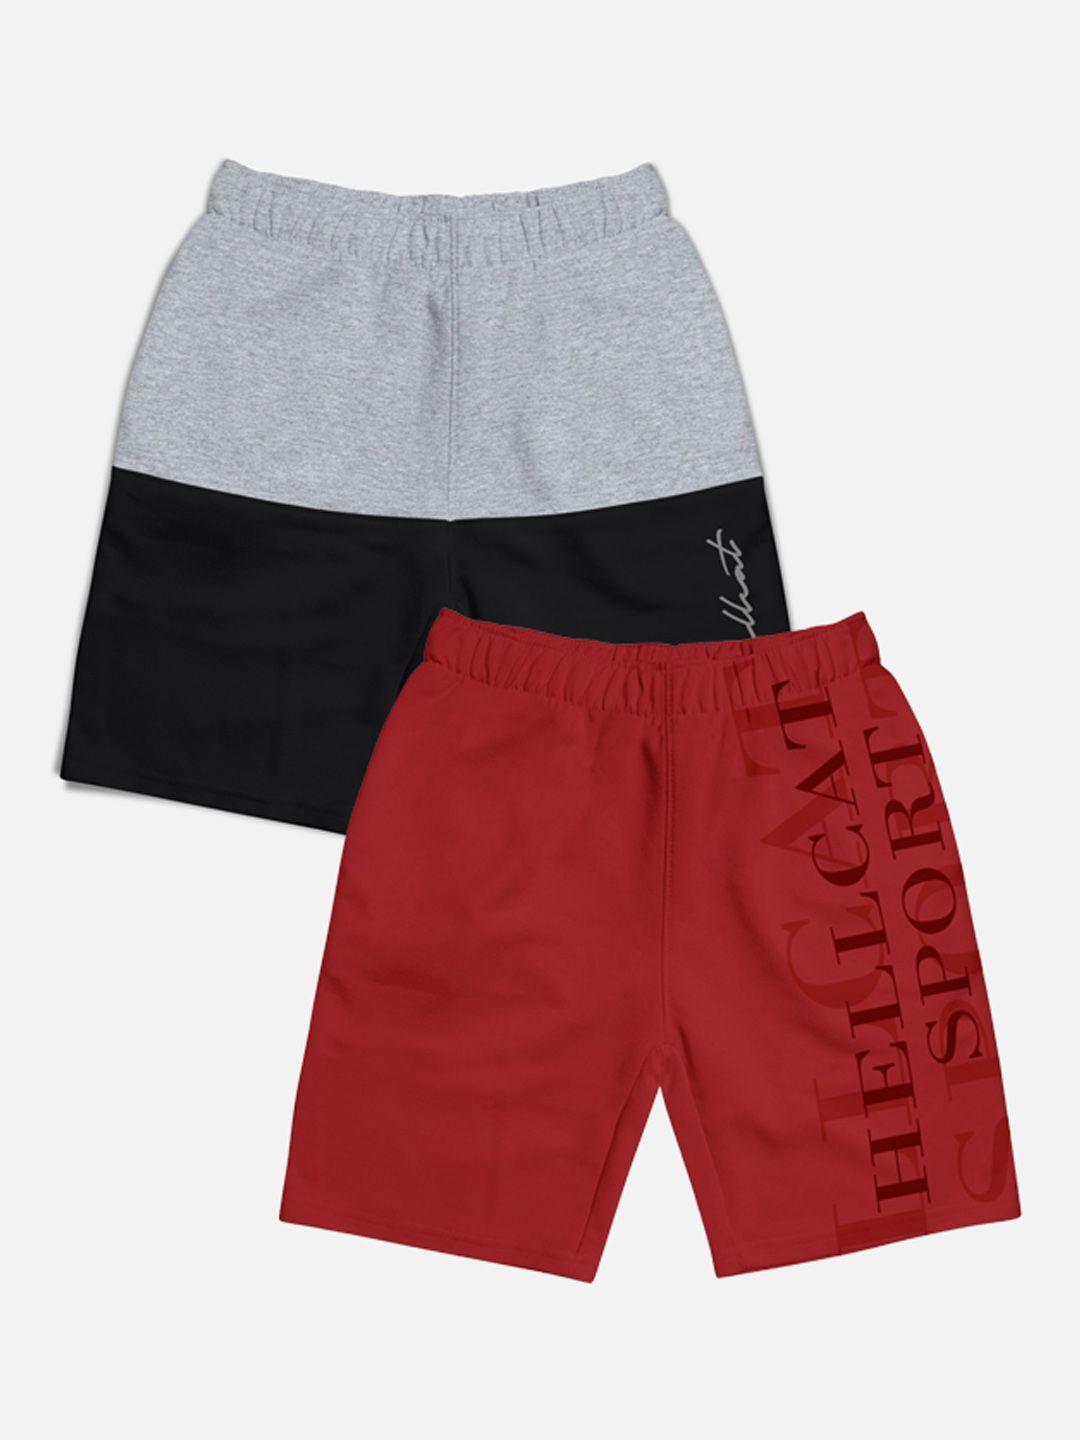 hellcat boys pack of 2 typography printed cotton shorts